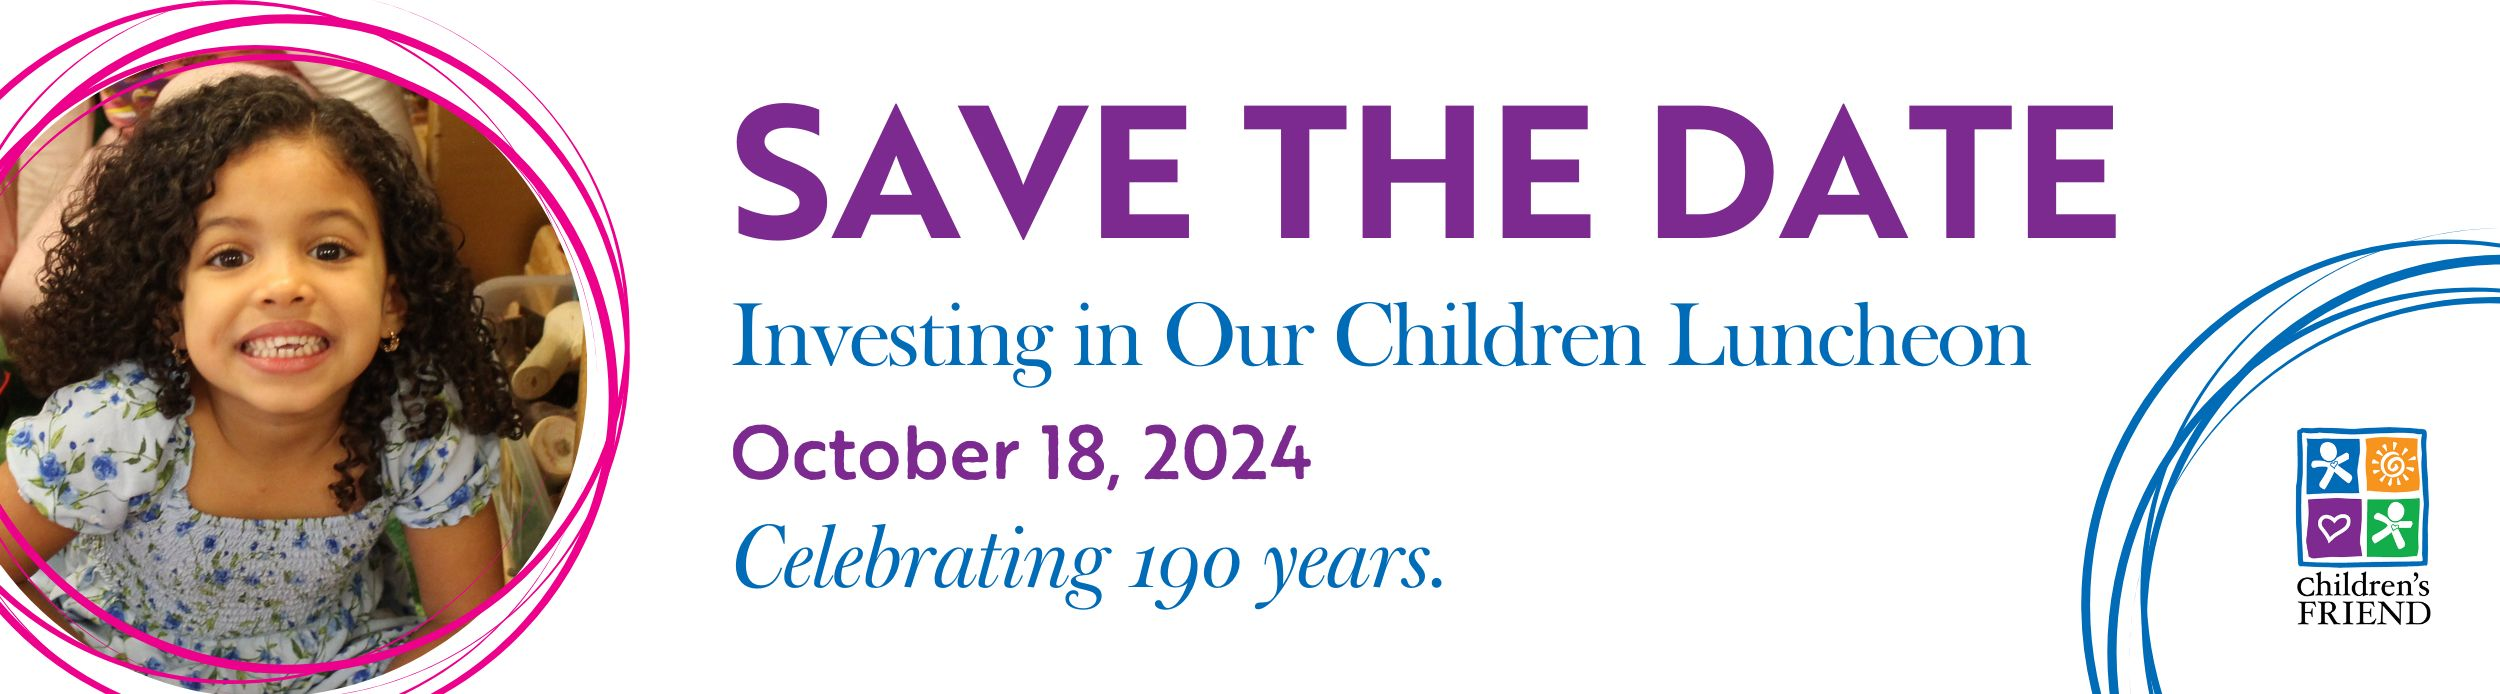 Save the Date, Investing in Our Children Luncheon